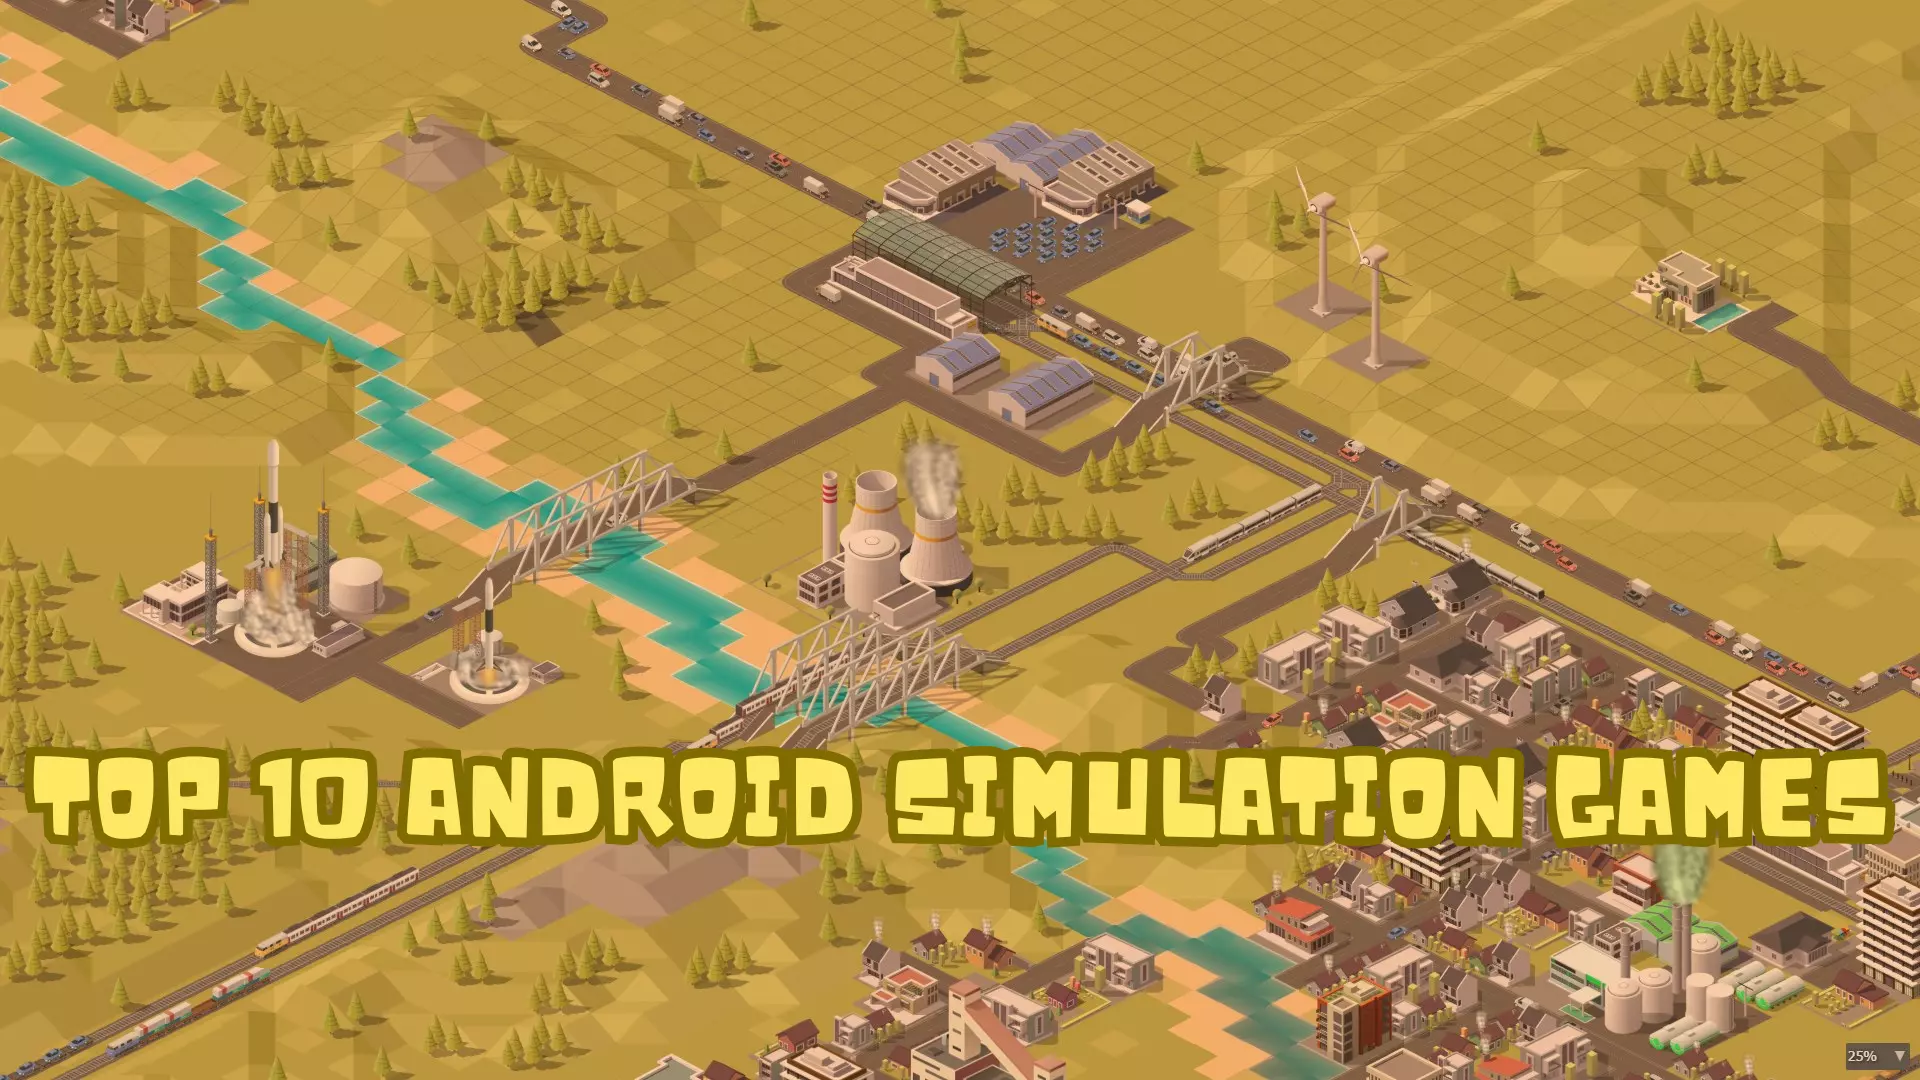 Top 10 Android Simulation Games